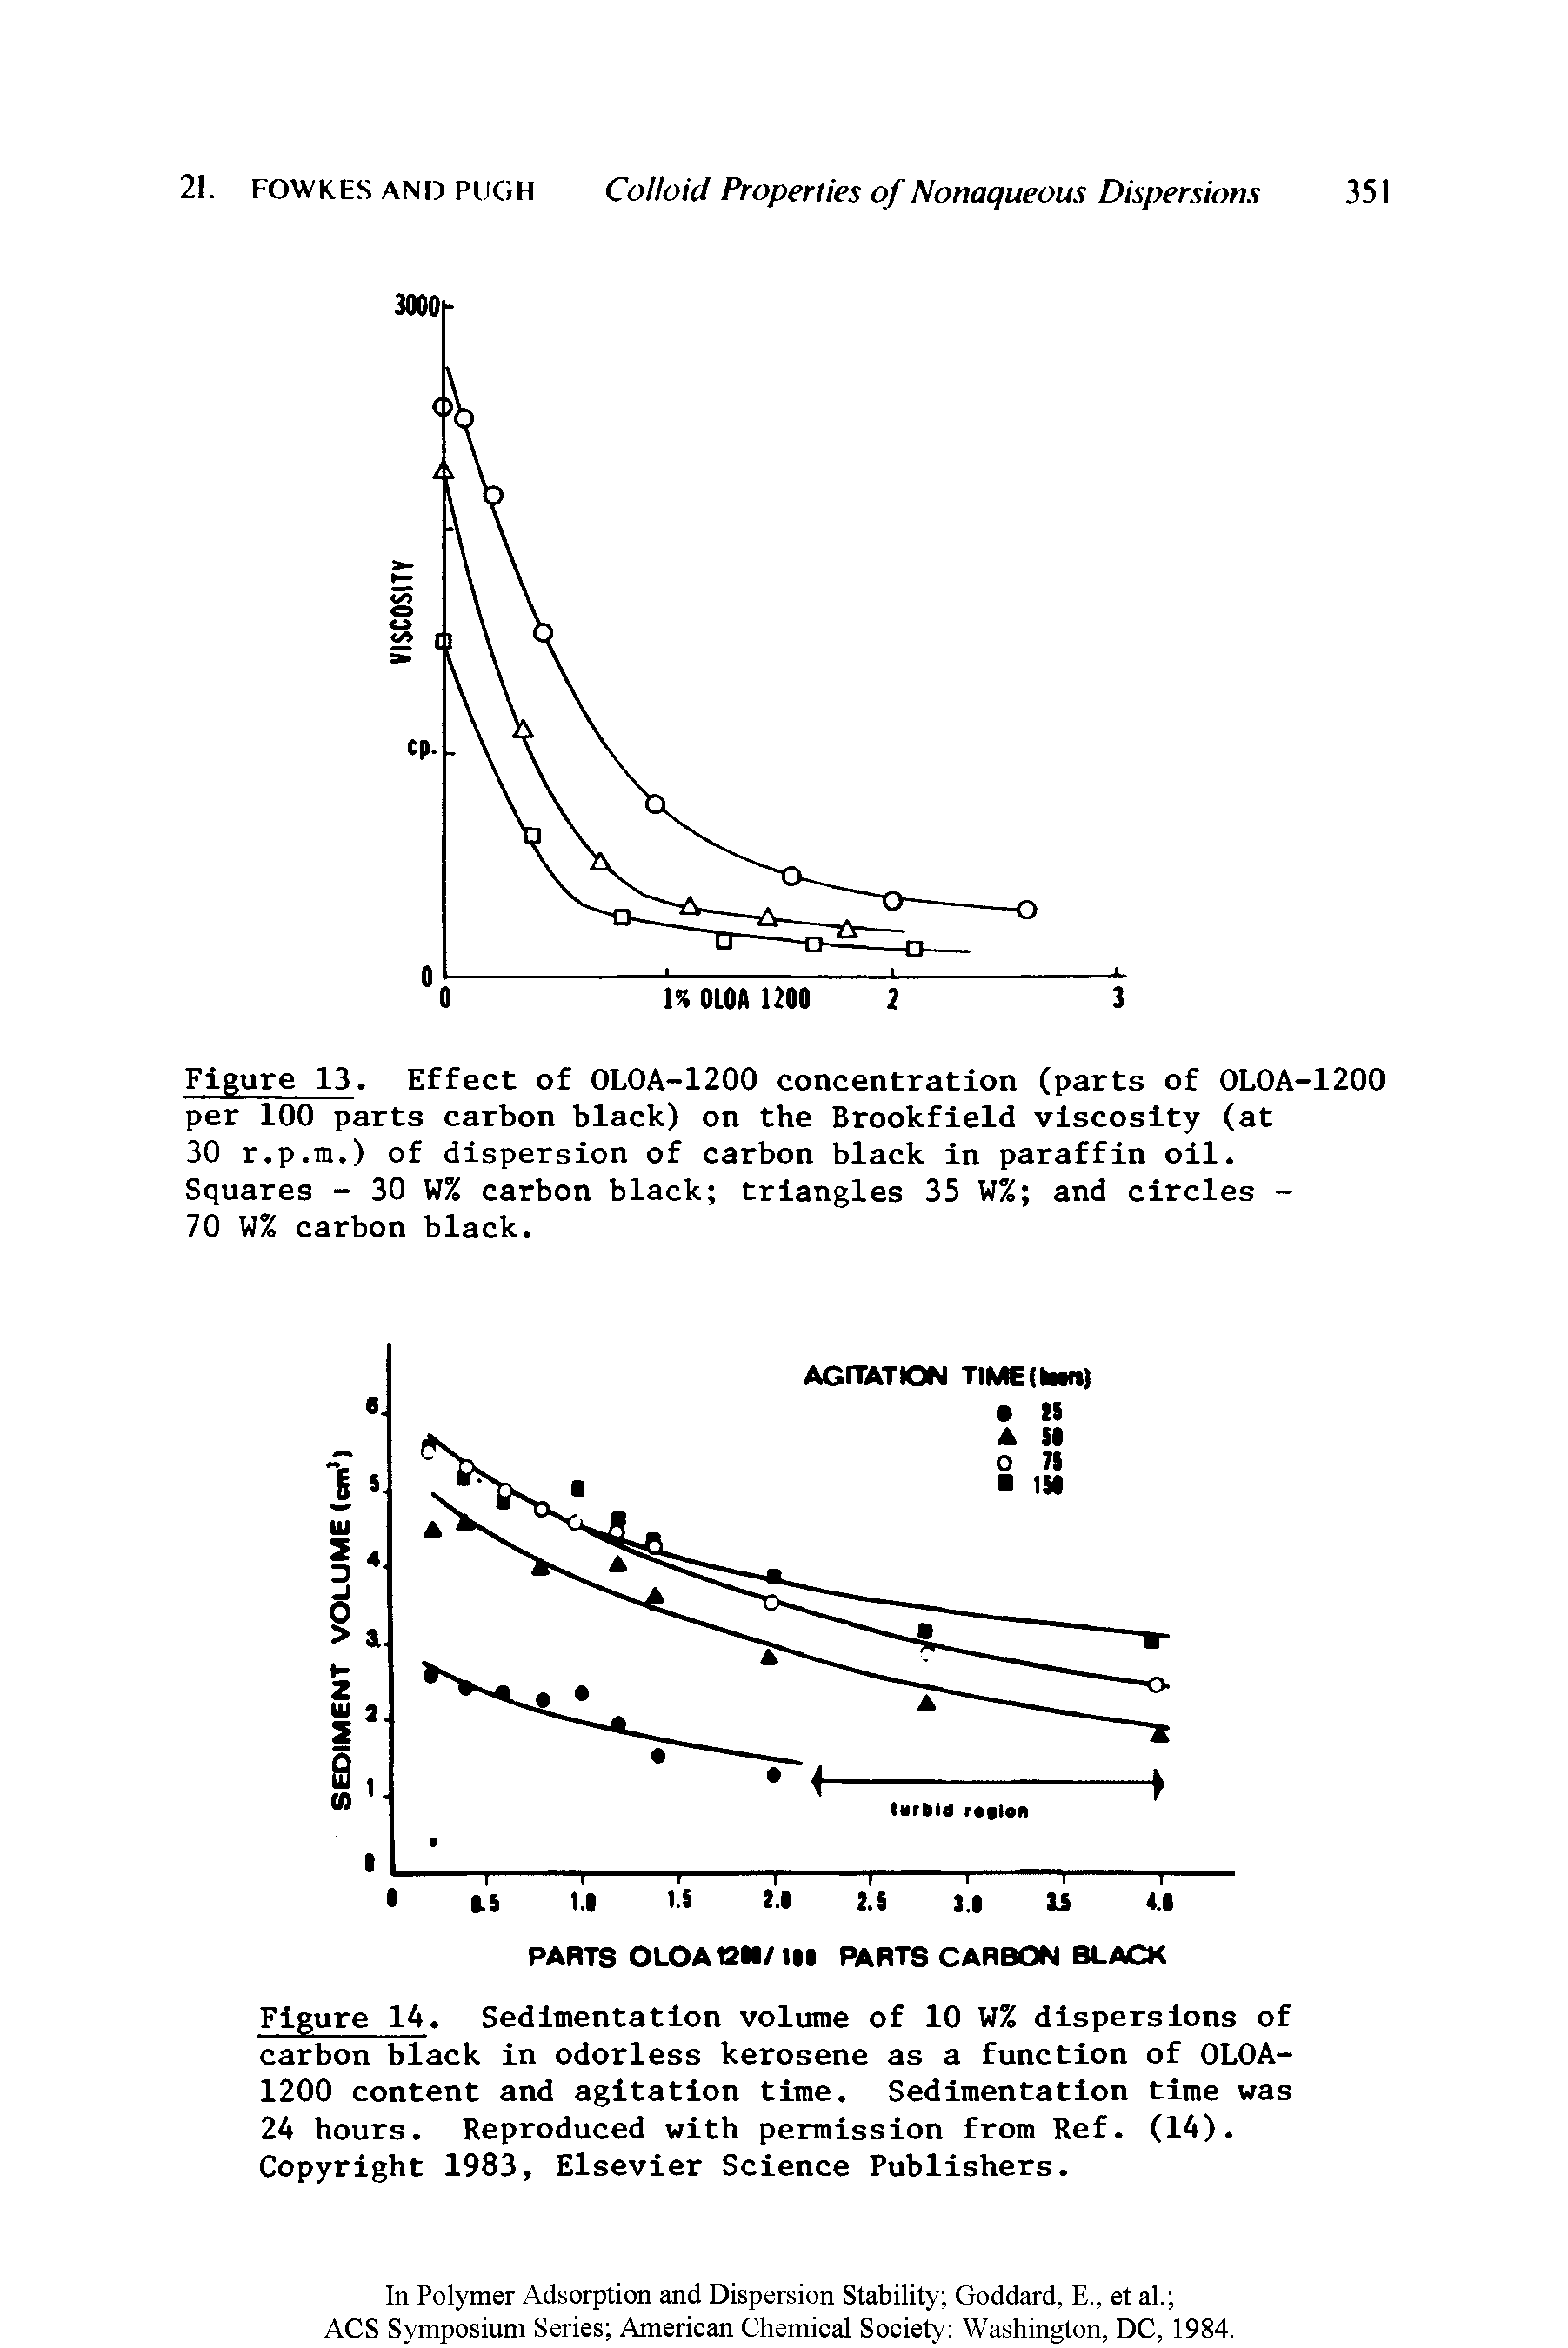 Figure 1A. Sedimentation volume of 10 W% dispersions of carbon black in odorless kerosene as a function of 0L0A-1200 content and agitation time. Sedimentation time was 2A hours. Reproduced with permission from Ref. (1A). Copyright 1983, Elsevier Science Publishers.